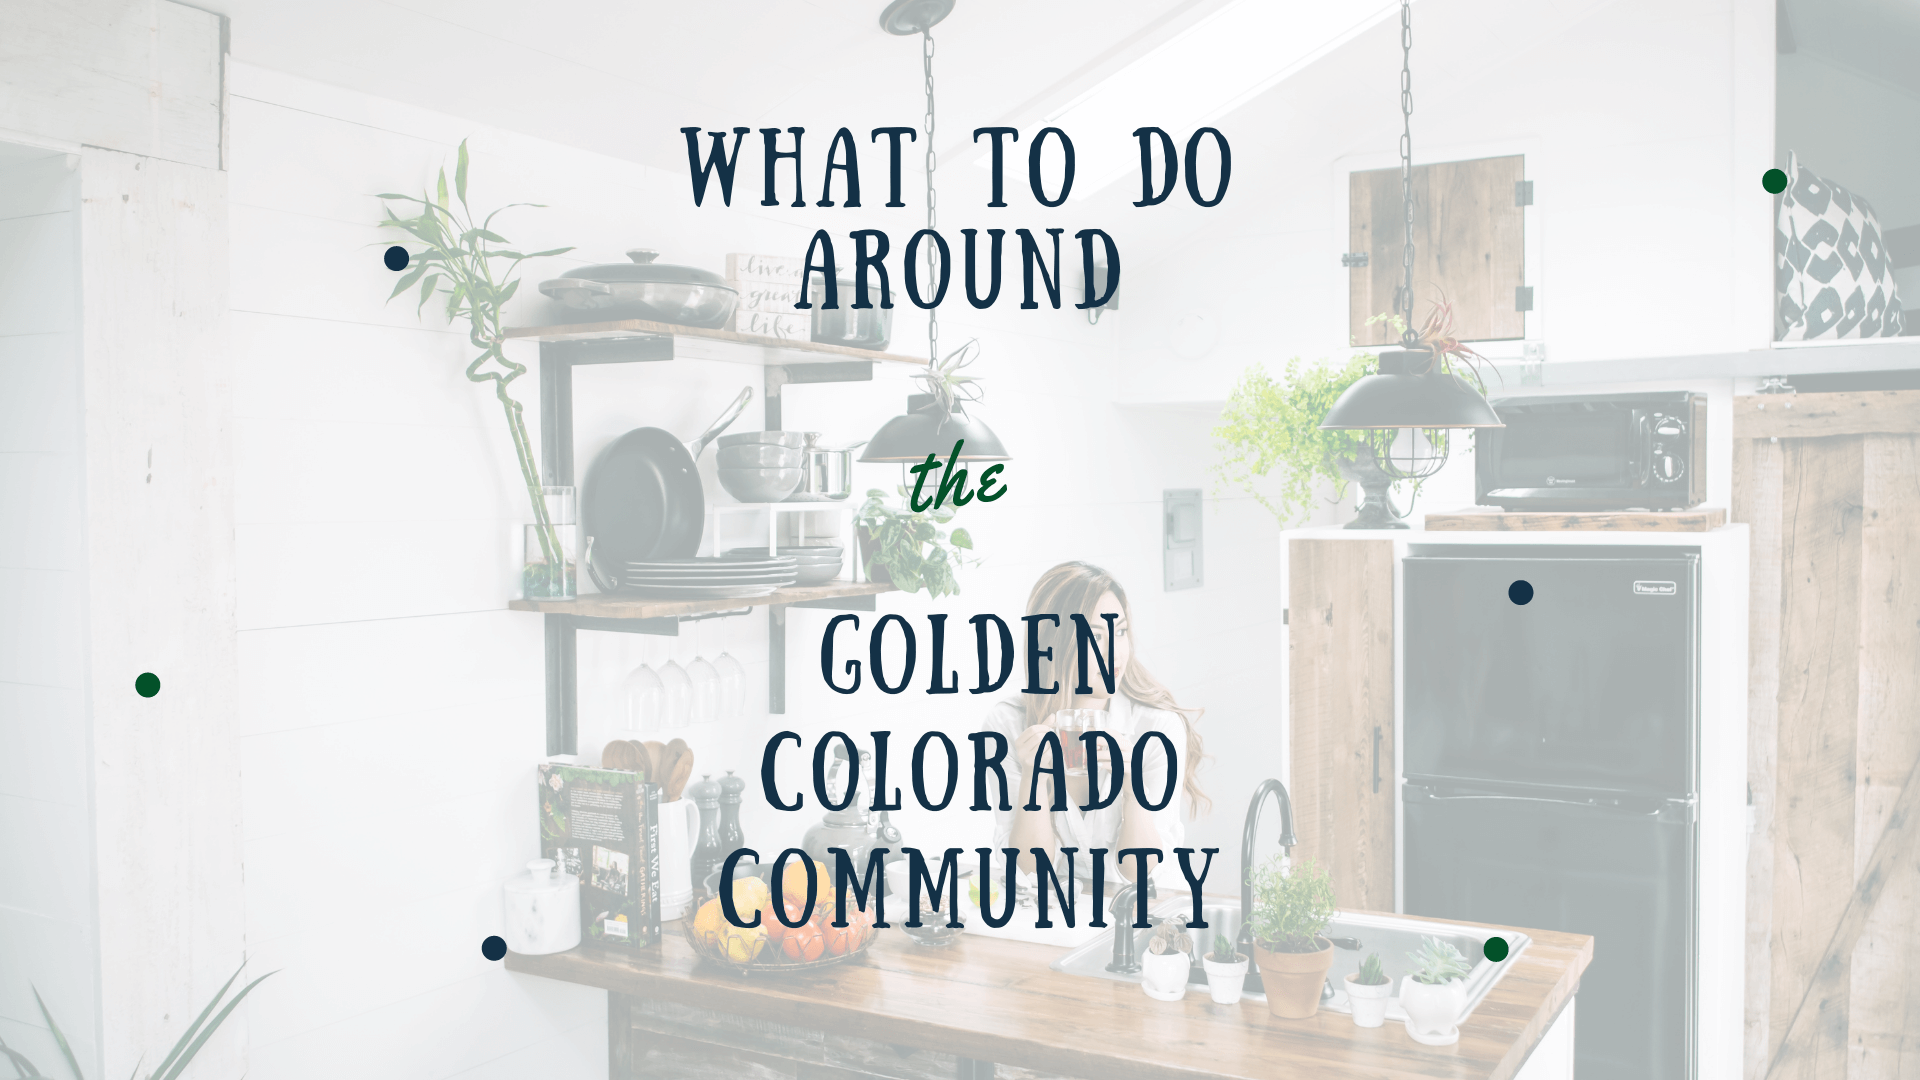 Things to Do In and Around the Golden Colorado Community - article banner